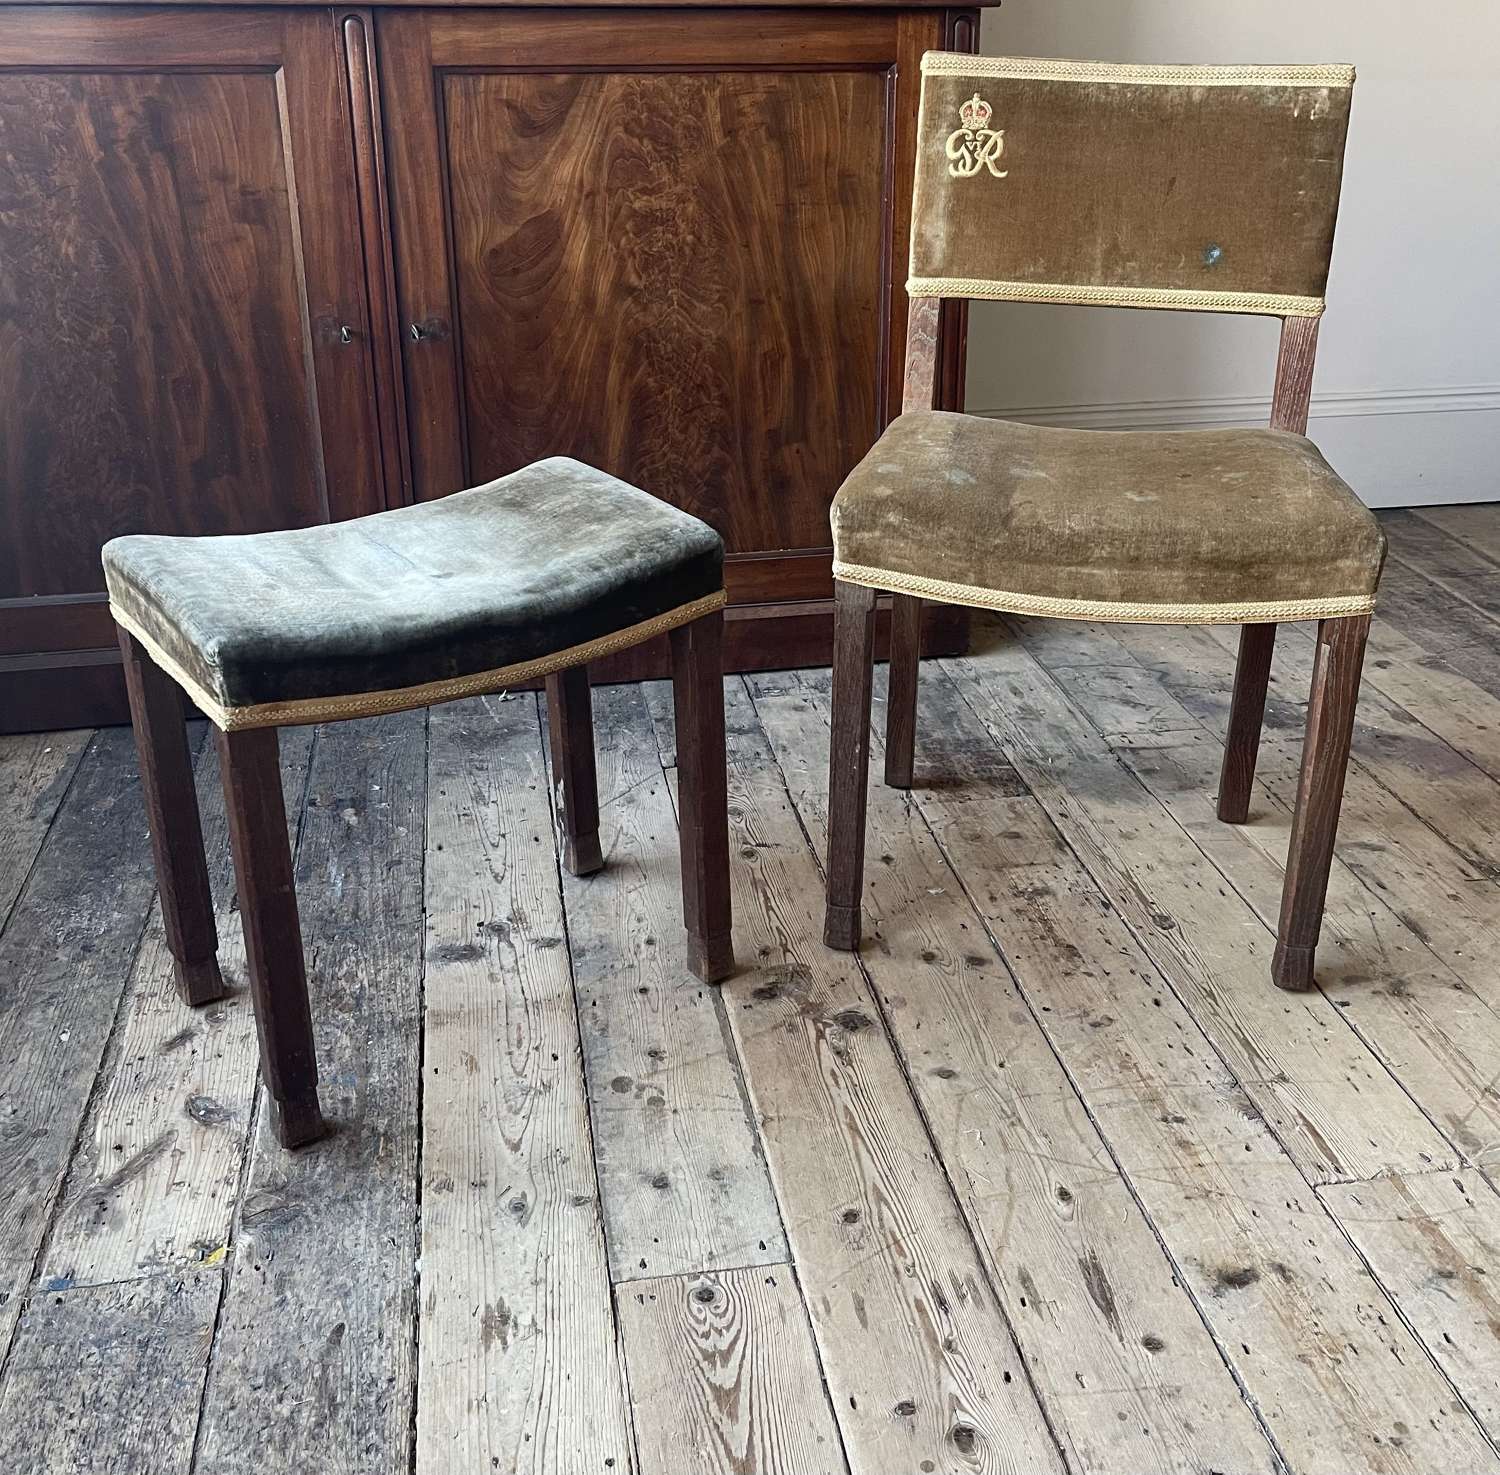 A George VI Coronation chair and stool